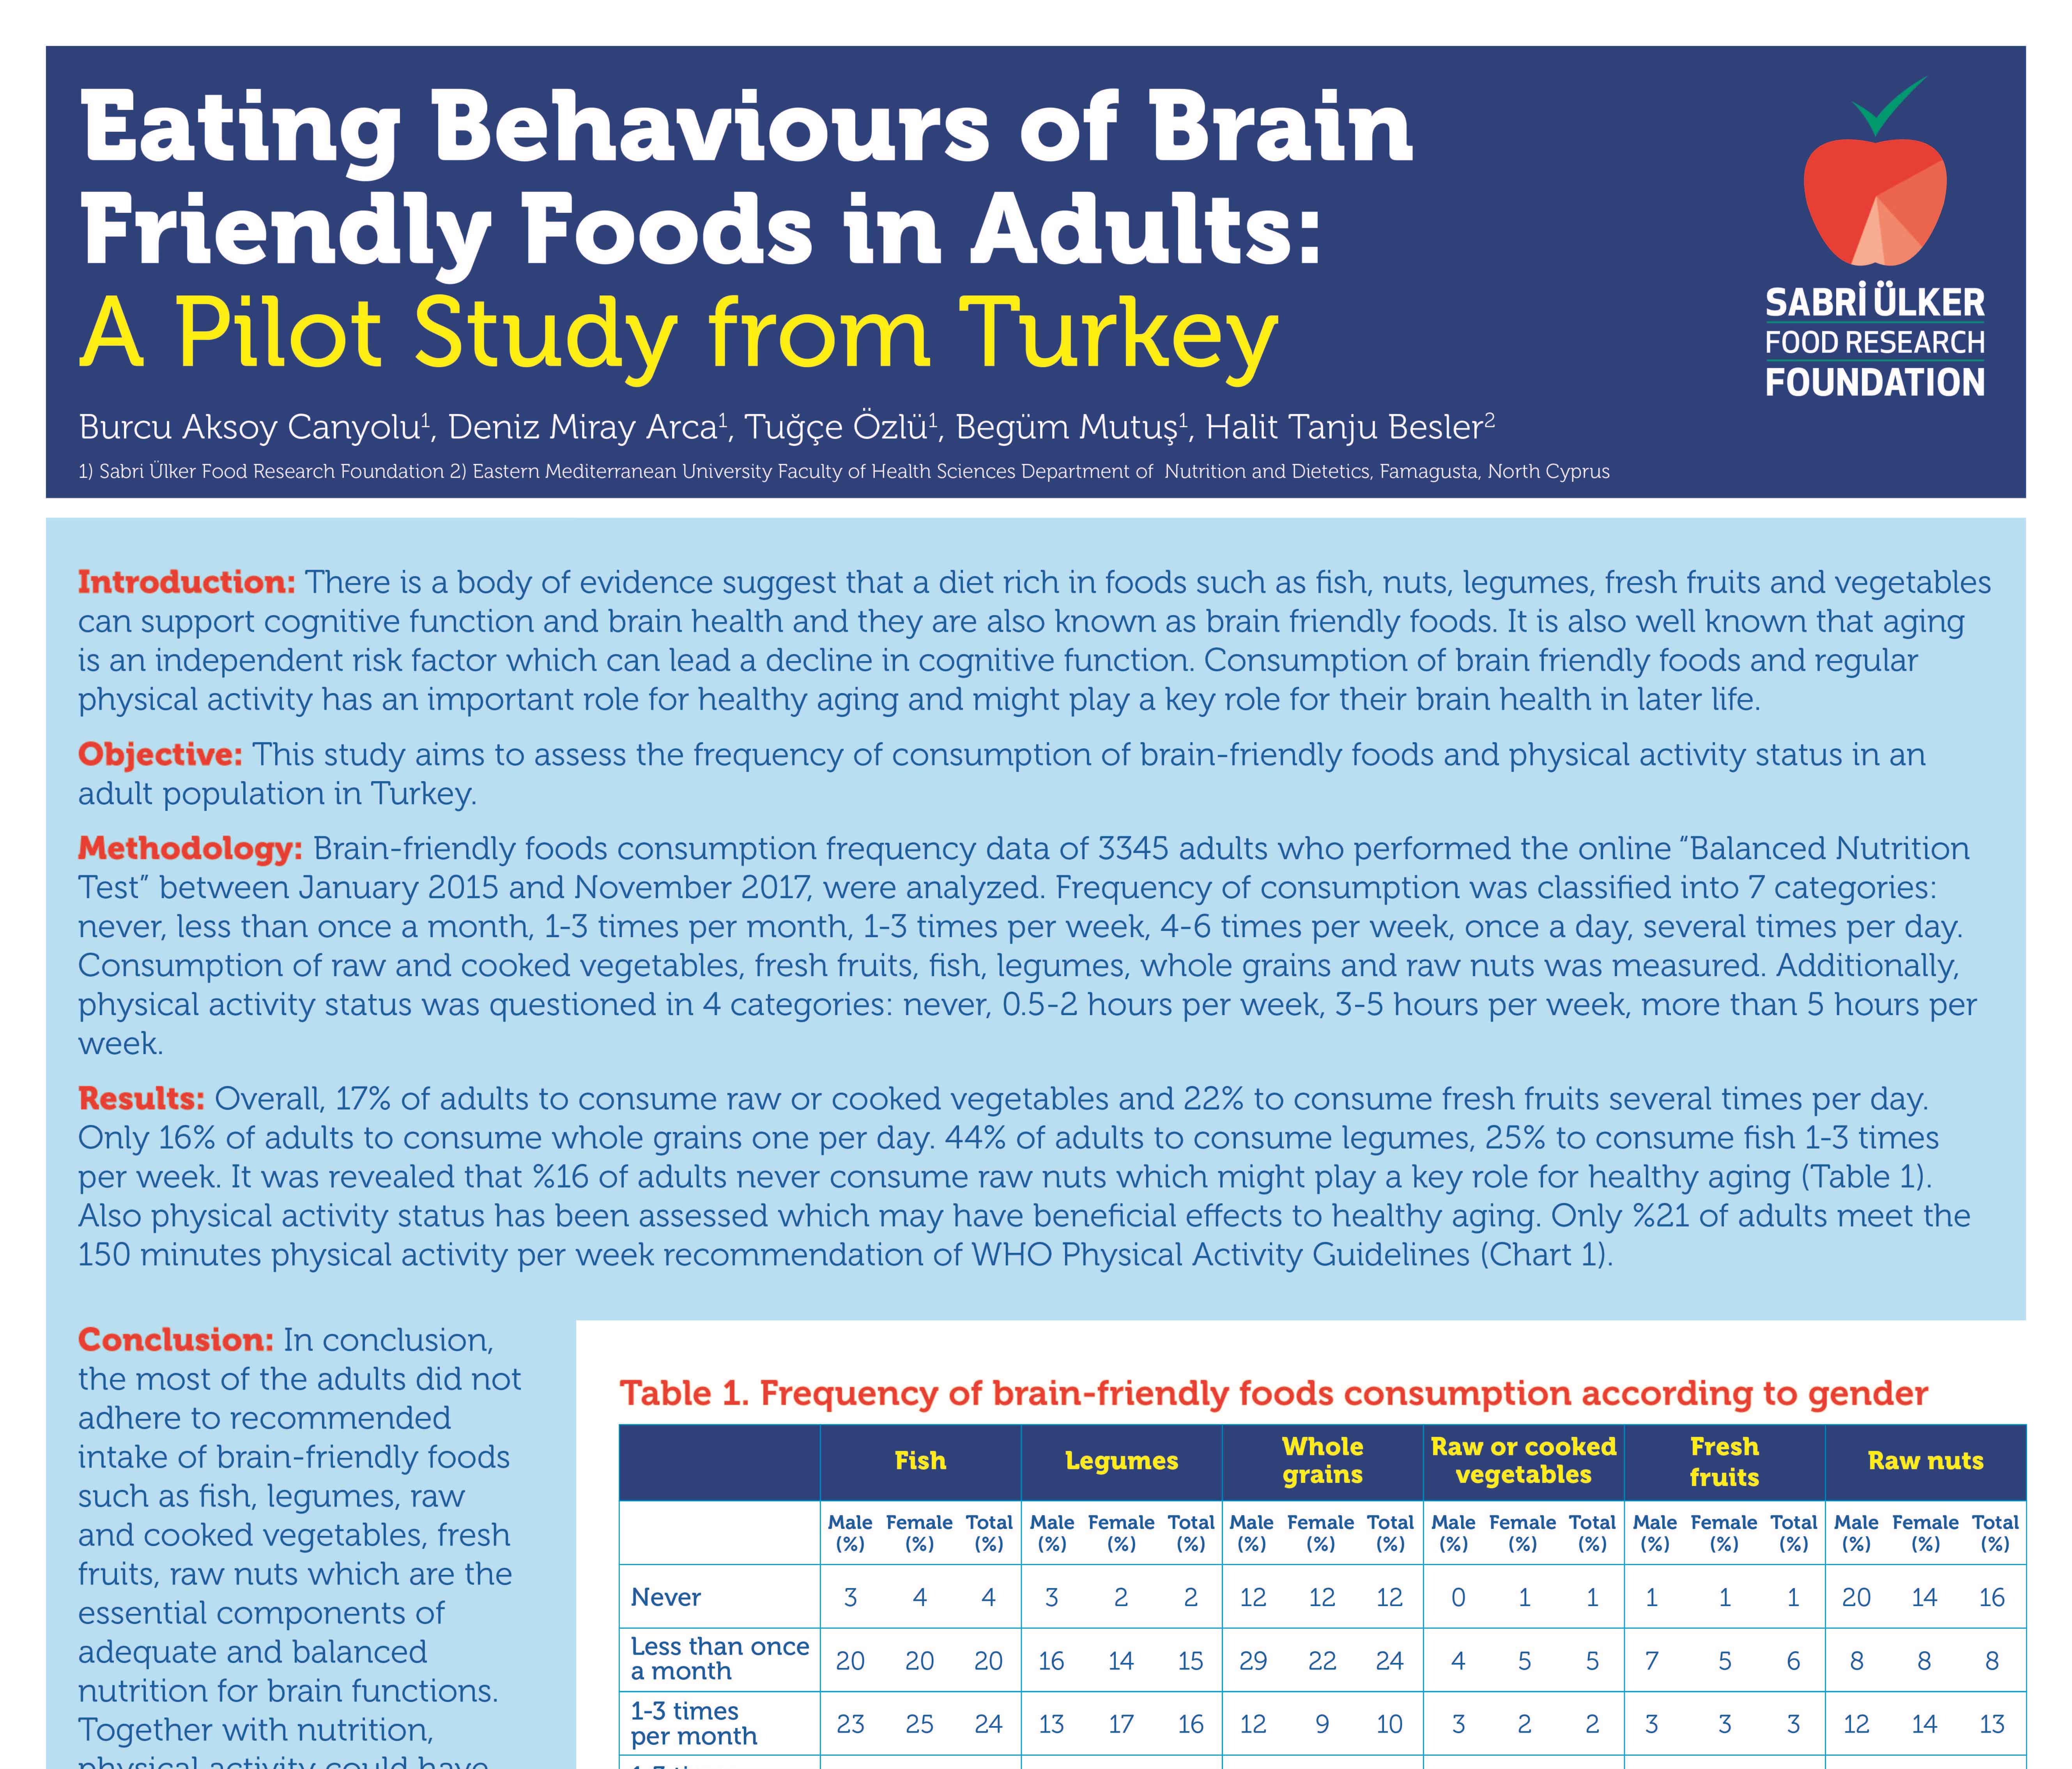 Eating Behaviours of Brain Friendly Foods in Adults: A Pilot Study from Turkey